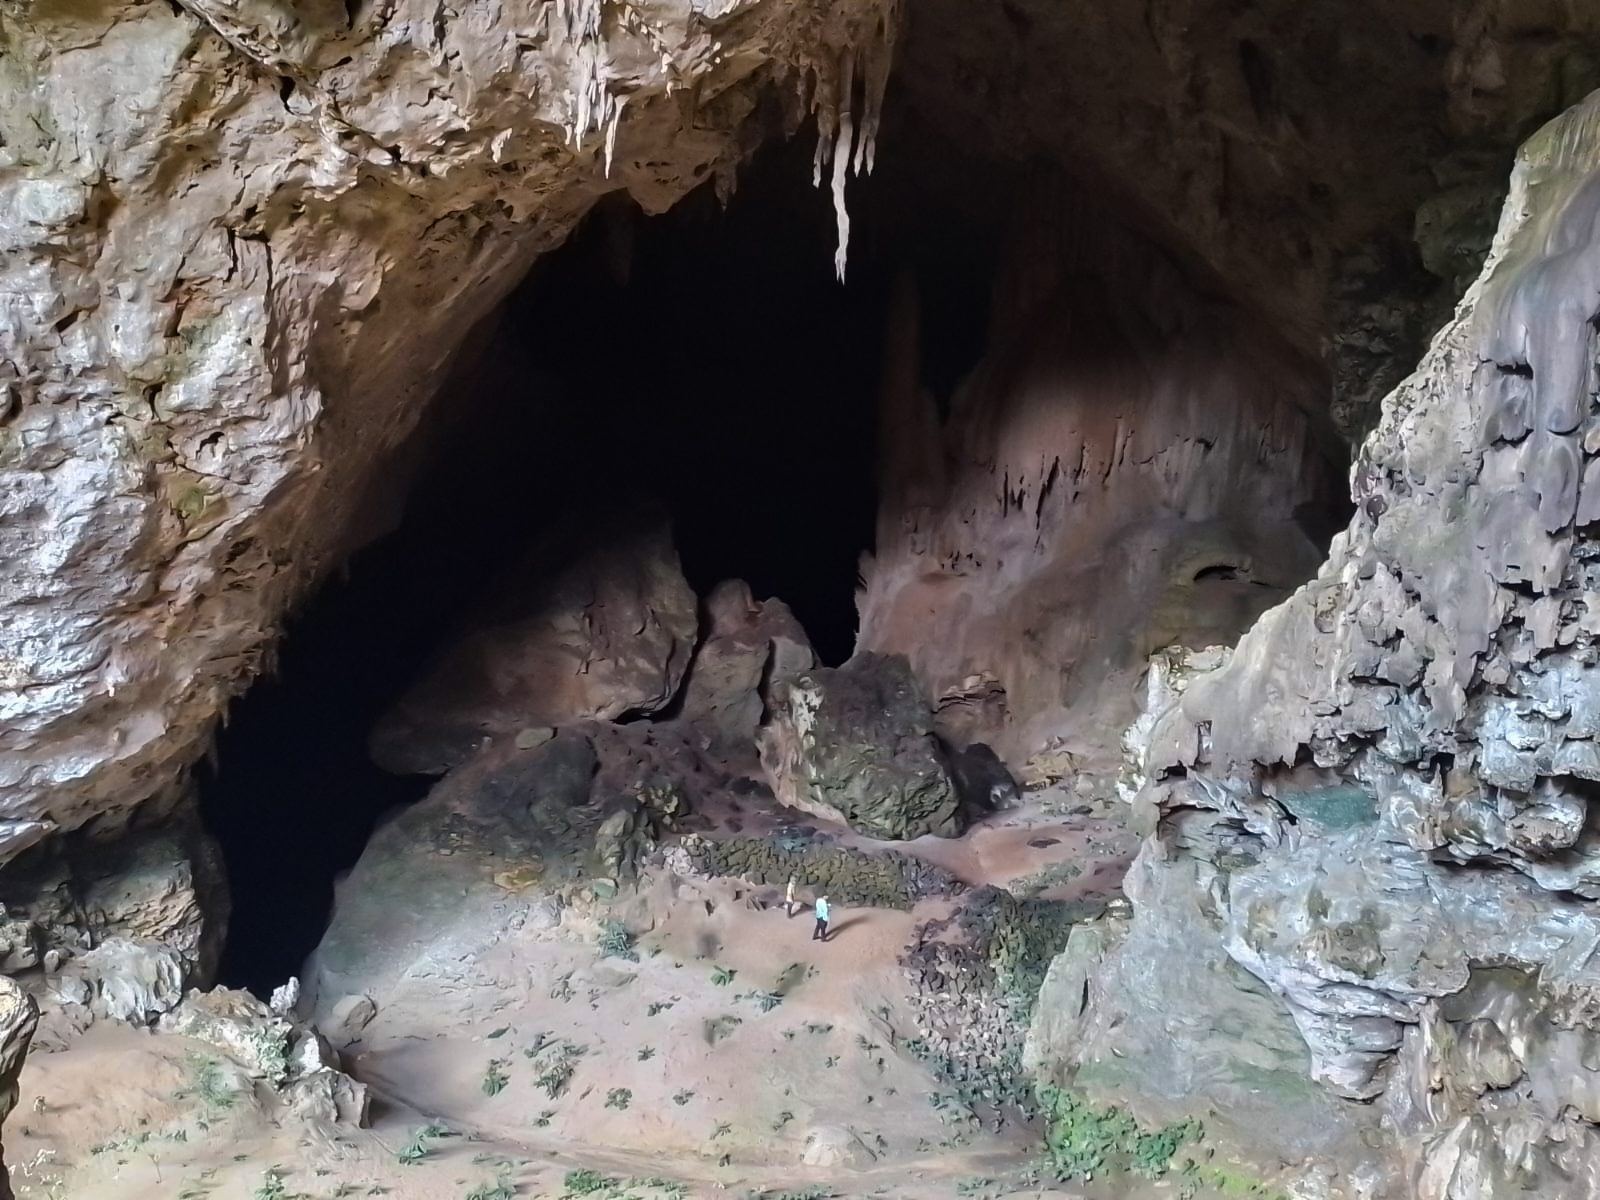 Four hydrologically linked caves totalling approximately 149.7 hectares in length.